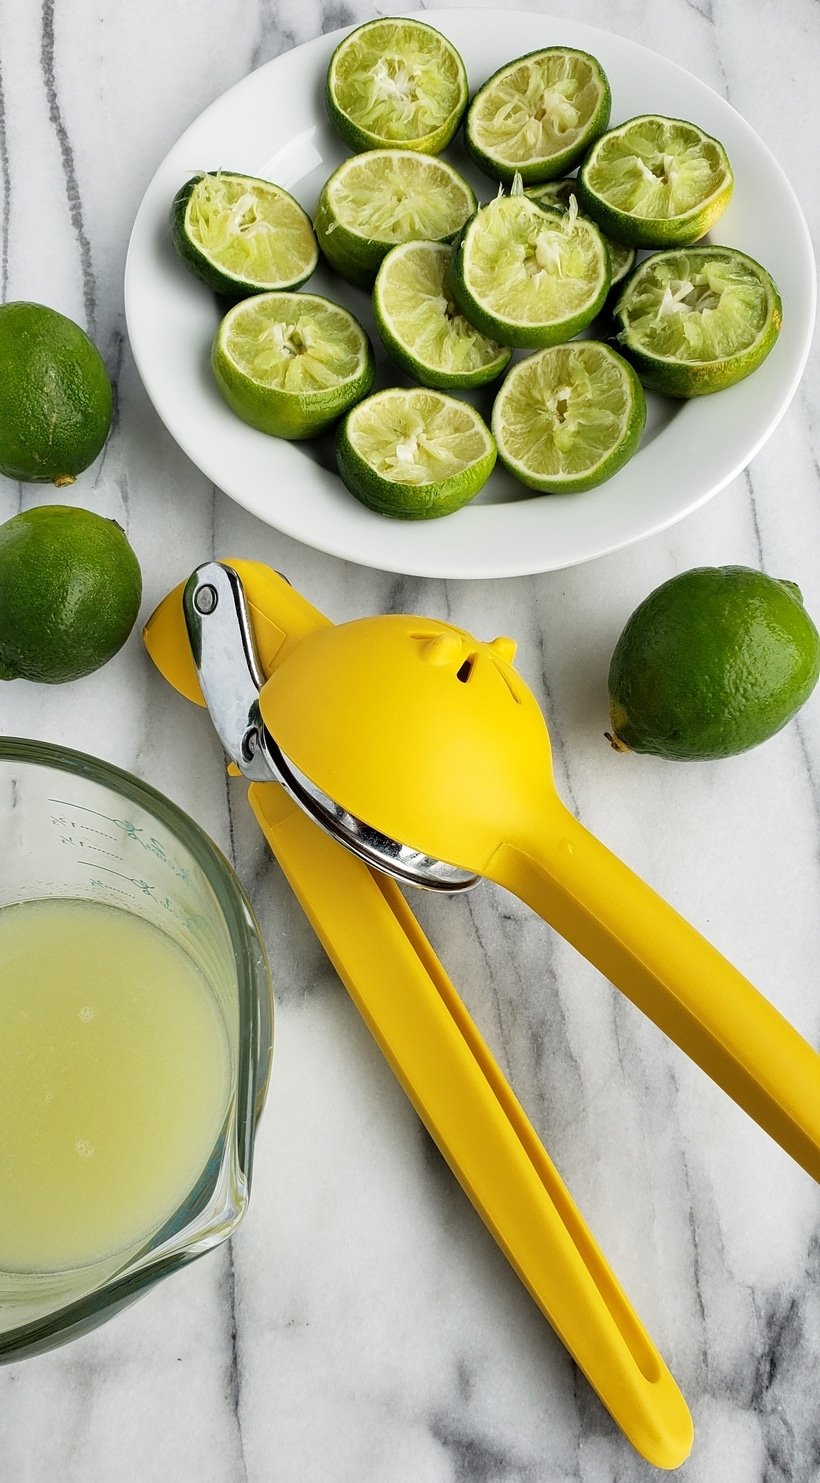 Lime juice, squeezed lime and citrus squeezing tool on white marble.